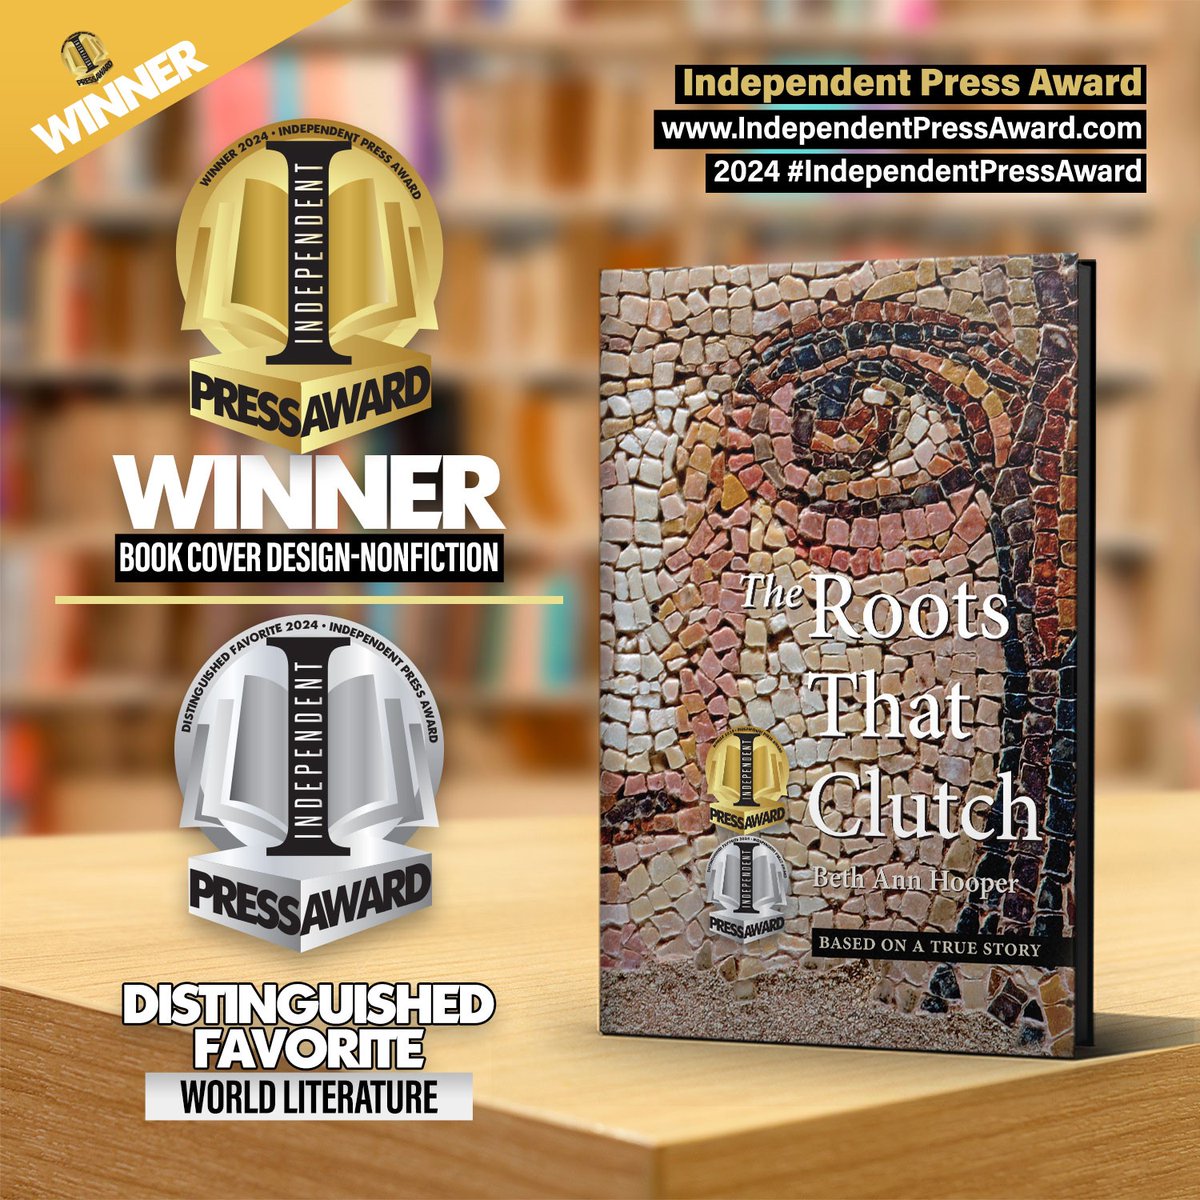 @GabbyBookAwards Thank you for 2 Awards for The Roots That Clutch 
-Winner Book Cover Design Non-Fiction 2024
-Distinguished Favorite World Literature 2024
Order your signed copy exclusively at sales@therootsthatclutch.com!
#2024IPA #IndependentPressAward #GabbyBookAwards